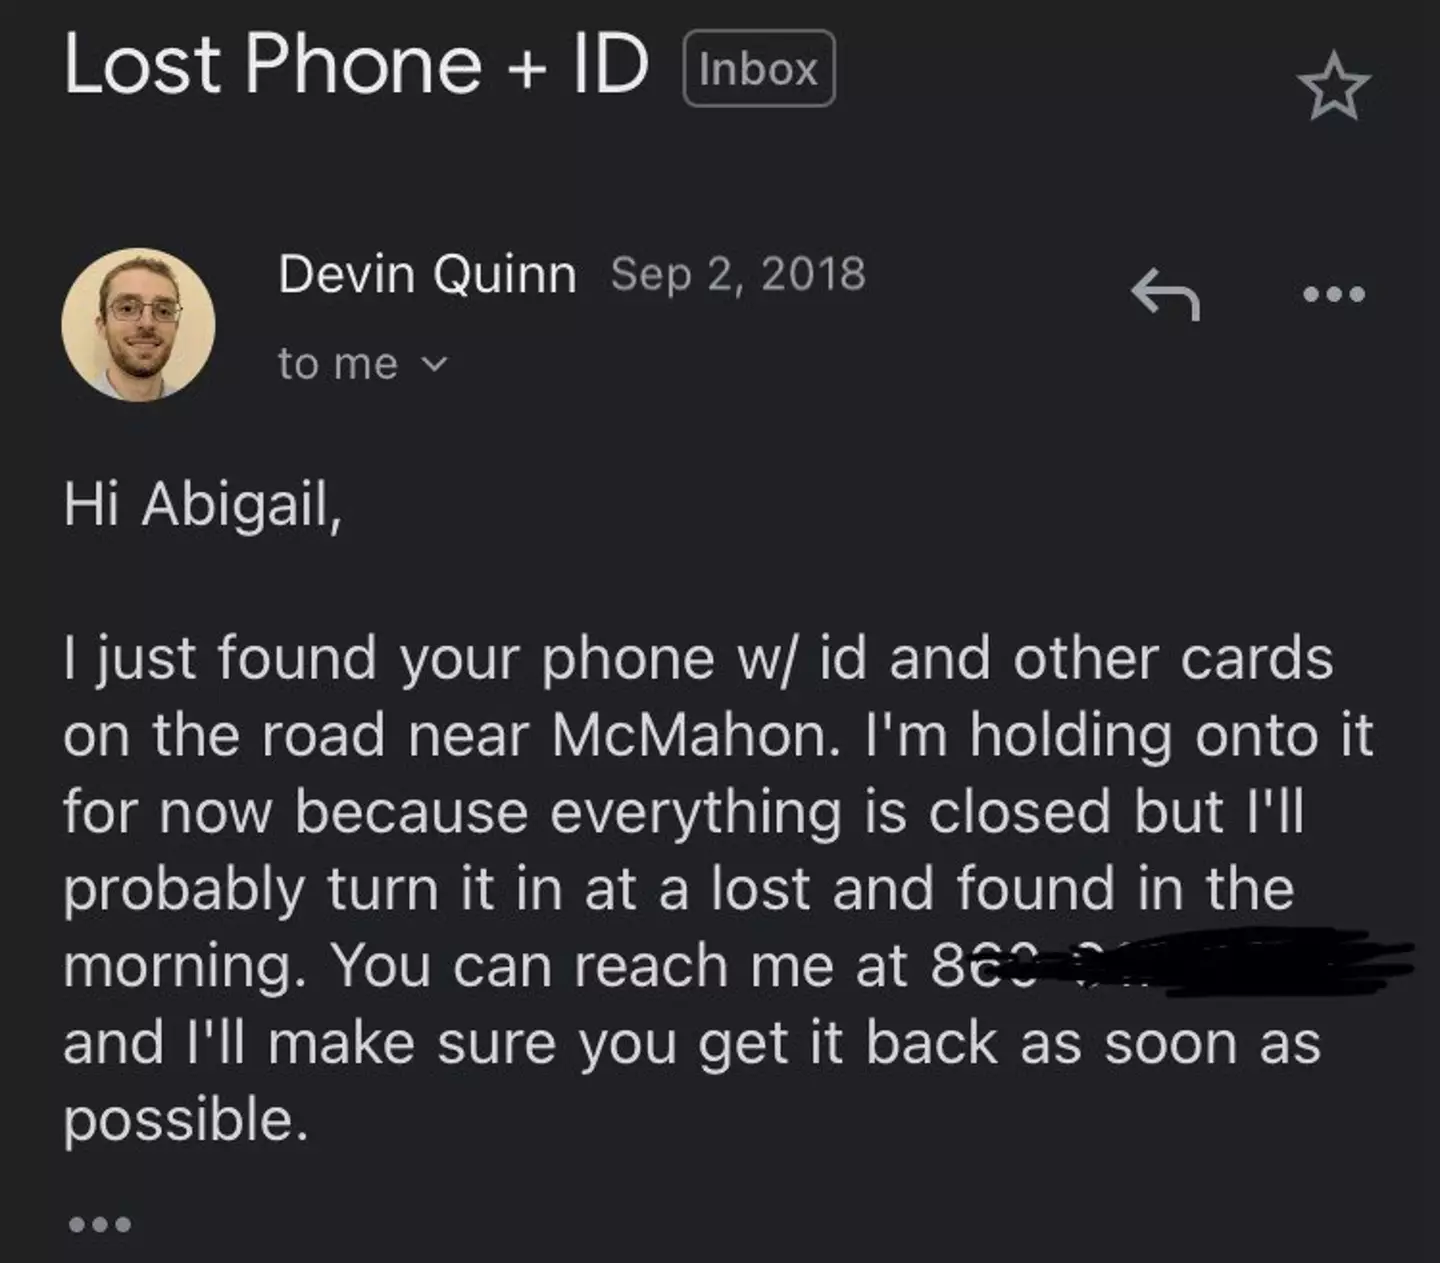 Devin found the lost phone and emailed Abby (